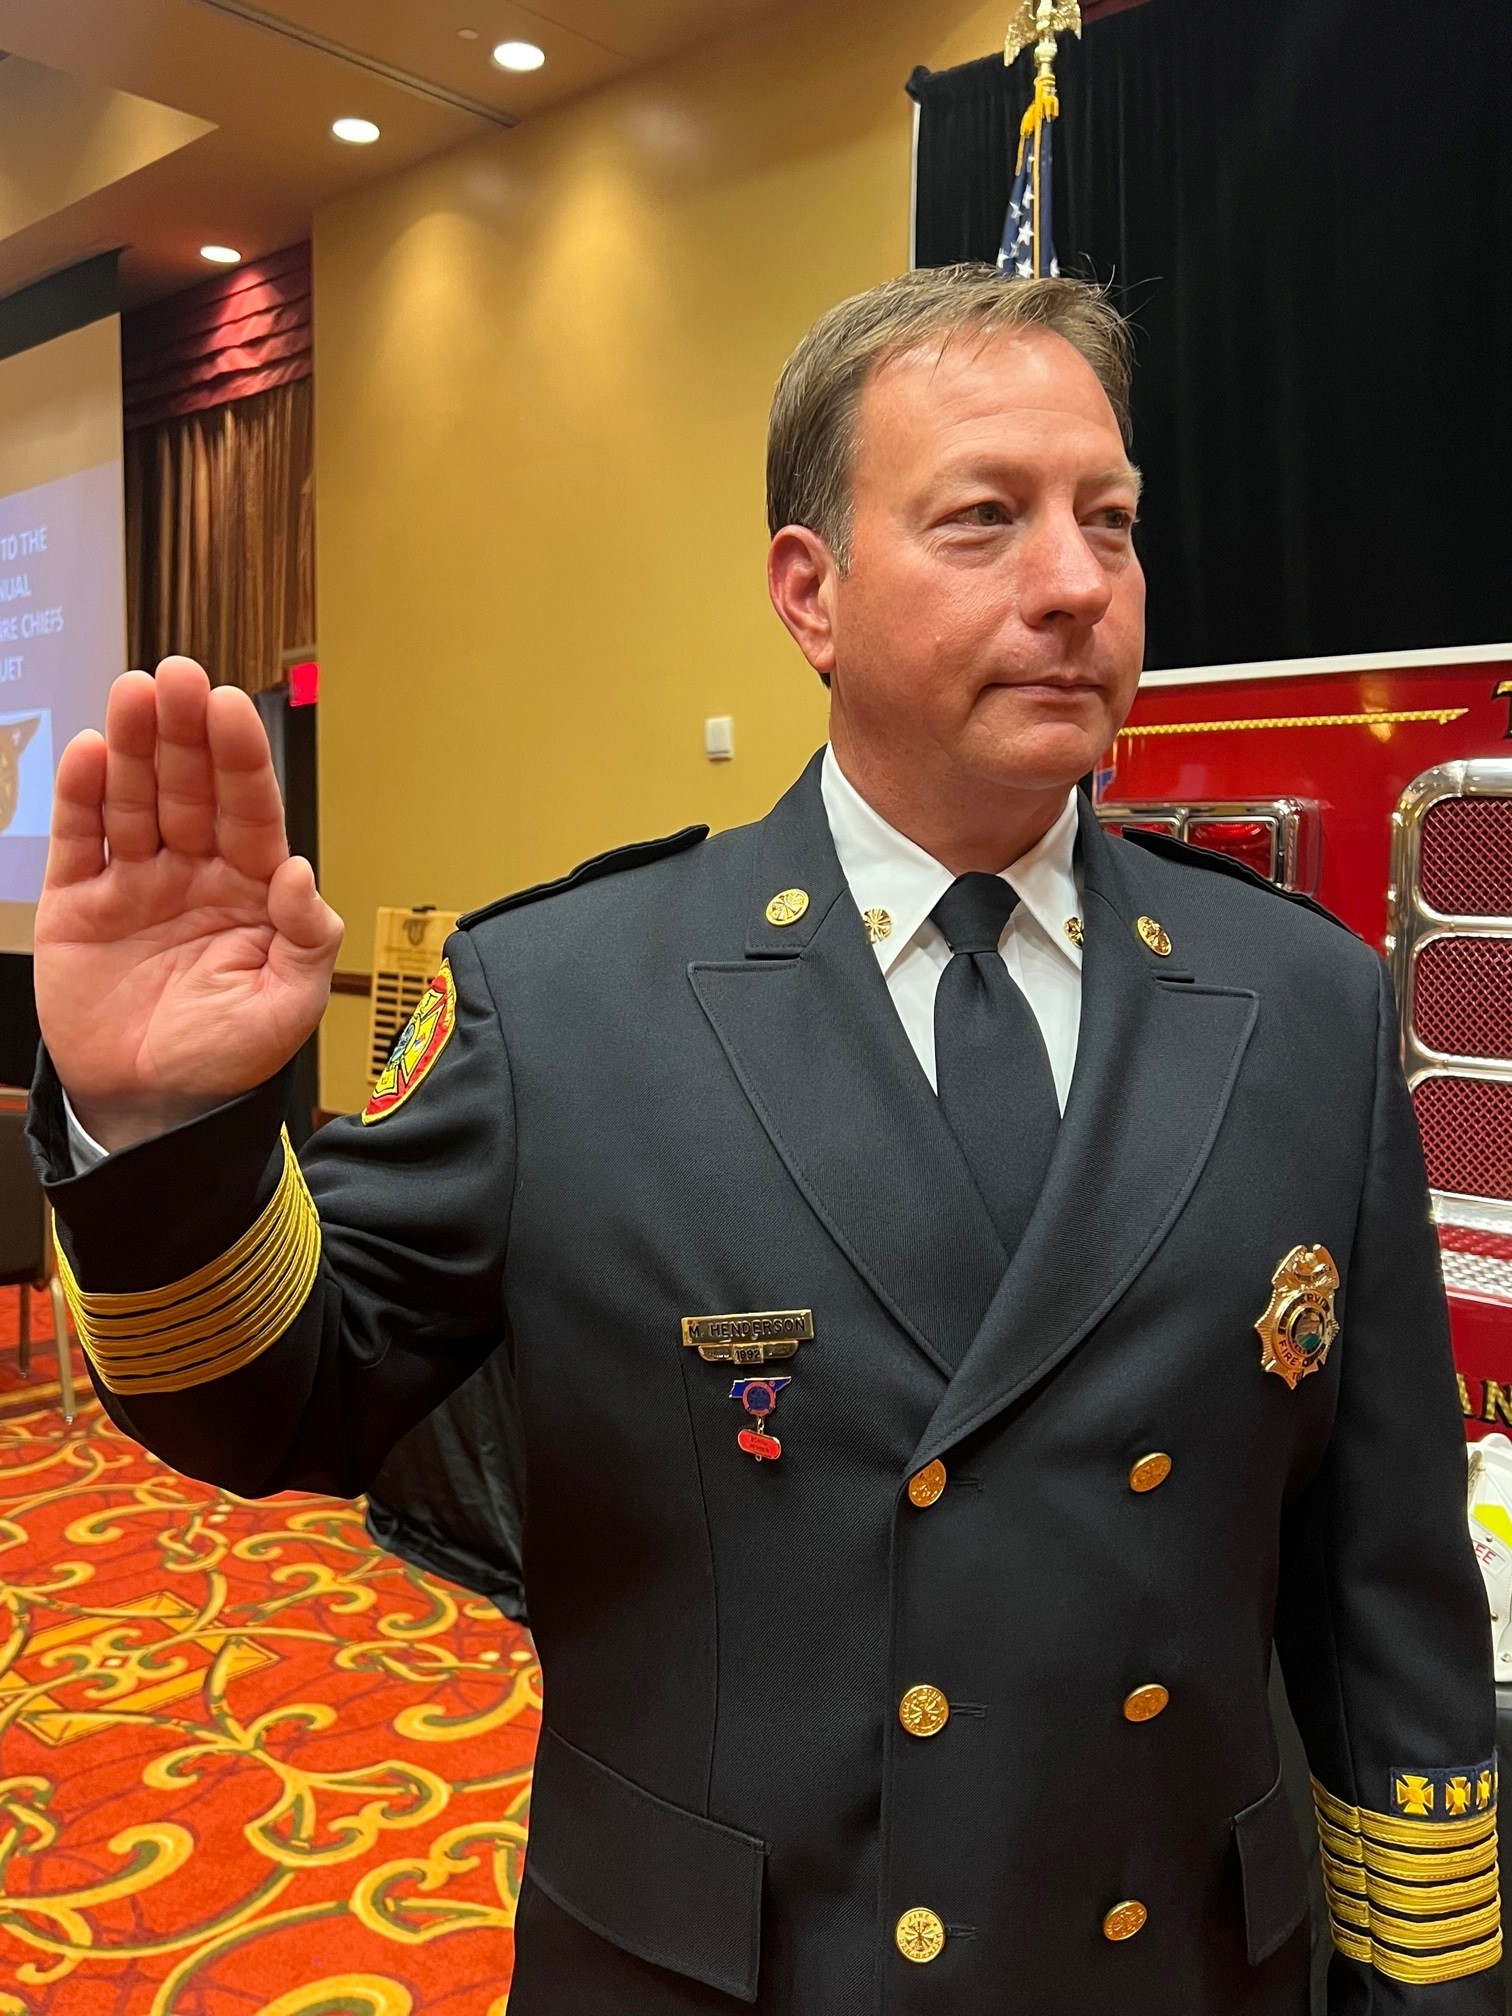 Sevierville Fire Chief Named Association President